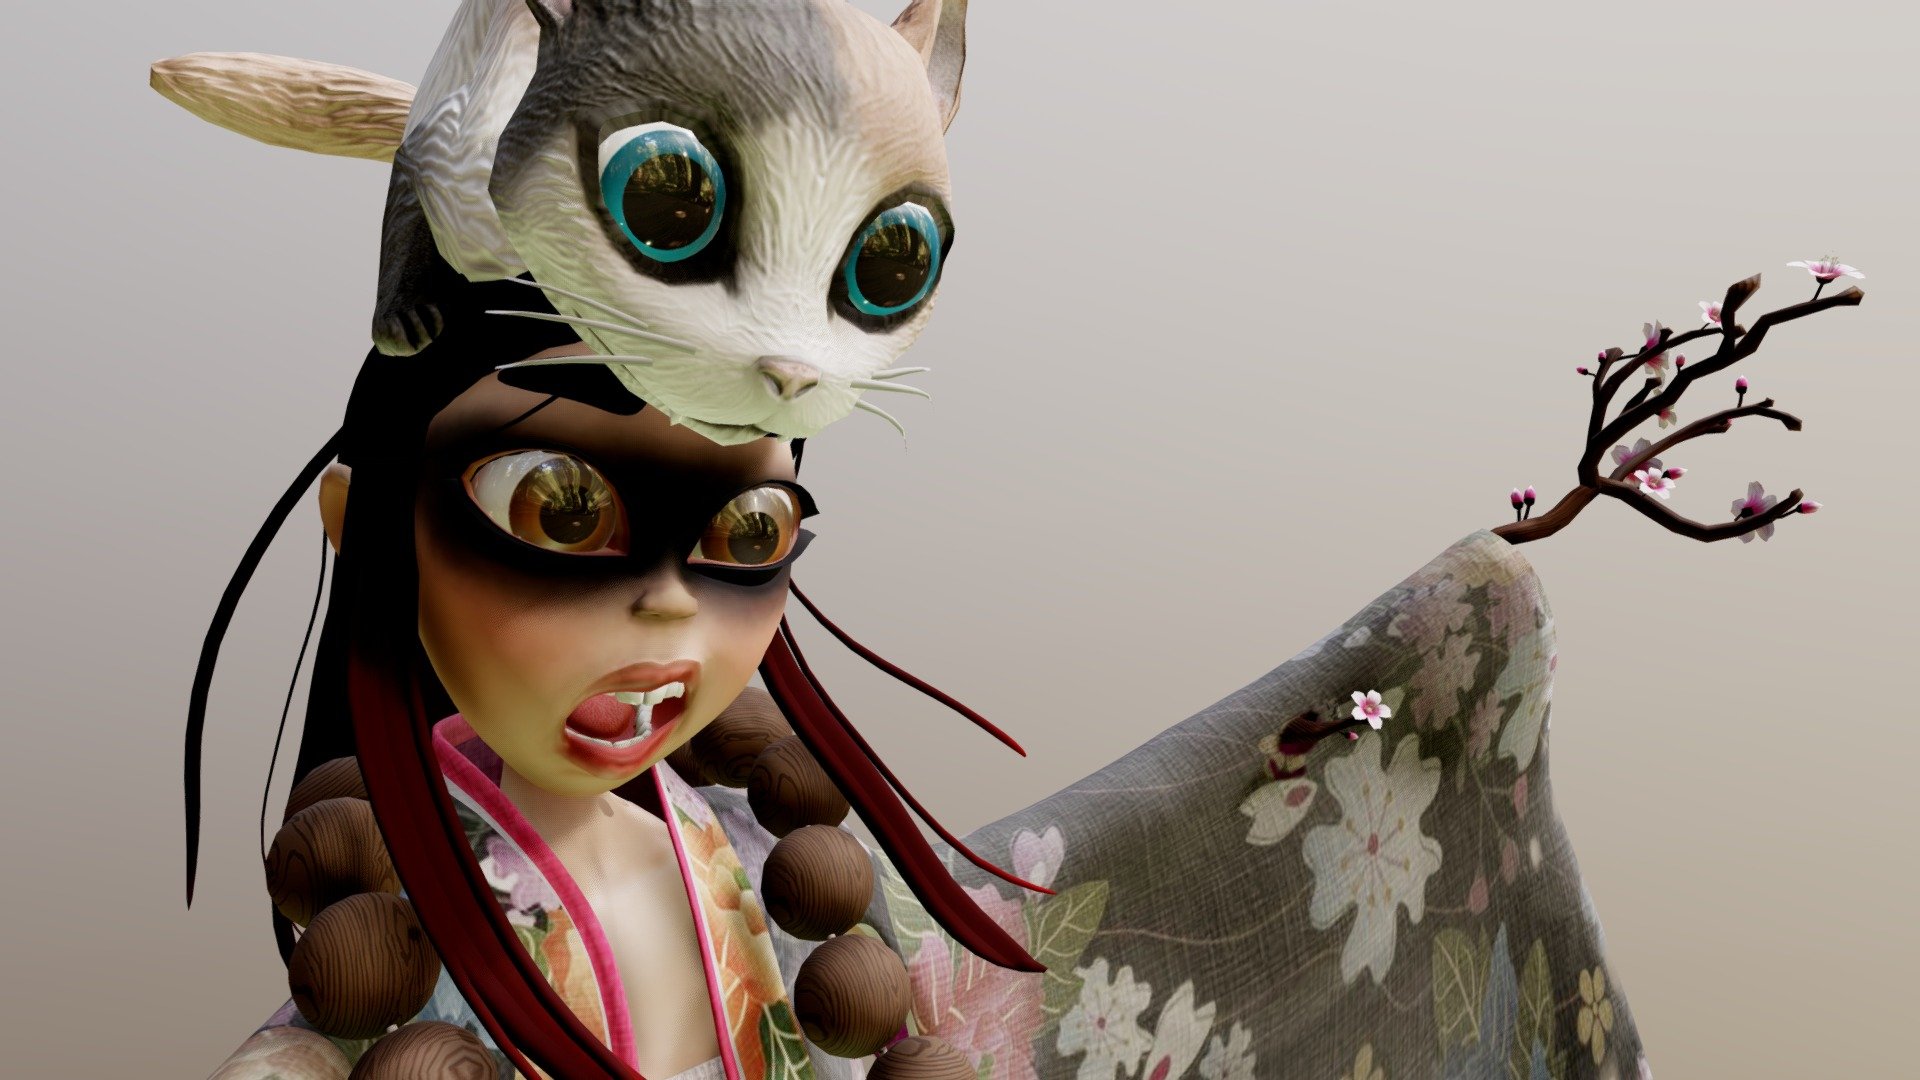 https://www.artstation.com/artwork/ybJ9yn

Little Riko-chan was born into a traveling troupe of actors. Unfortunately, they fell on hard times after putting on a satirical play making untasteful references to the local Daimyo's family tree. The politician was not pleased and ruined their reputation.

Rather than let the family go hungry, Riko-chan and her loyal cat, Neko-sama, took matters into their own hands. After raiding the prop and costume chest, they now scare the bejeezus out of wealthy travelers in the guise of an ogre and loot the belongings they inevitably leave behind.

This was my submission for the Feudal Japan Artstation Challenge. This was a fun idea to work on, but once again I felt like I lost a lot of time by not having picked a concept from the first stage of the challenge. Still, I'm fairly happy with the result, despite the constraints. If I were to fix stuff, it would be to redo the fabrics with marvelous or something, and redo the cat hair 3d model